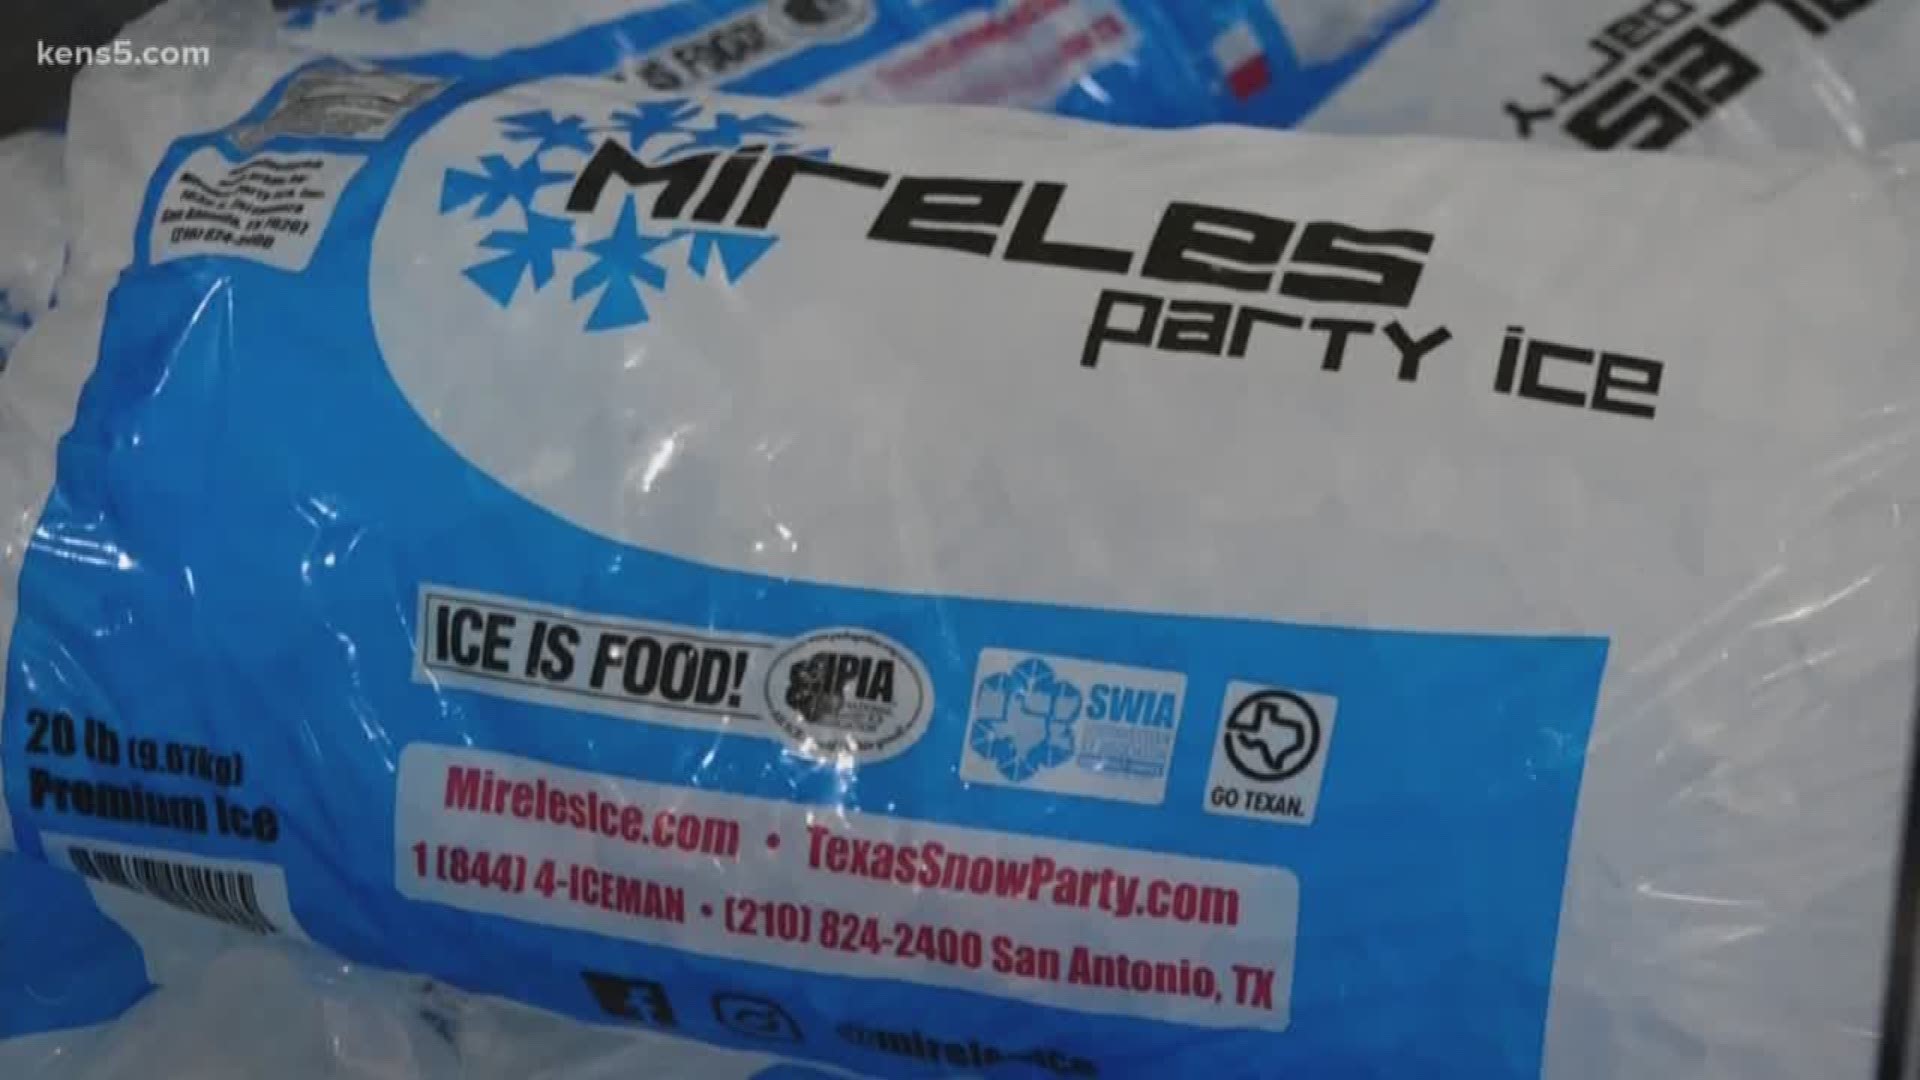 As the heat hits triple digits, profits are climbing for a local, family-owned ice business making some cold-hard cash.